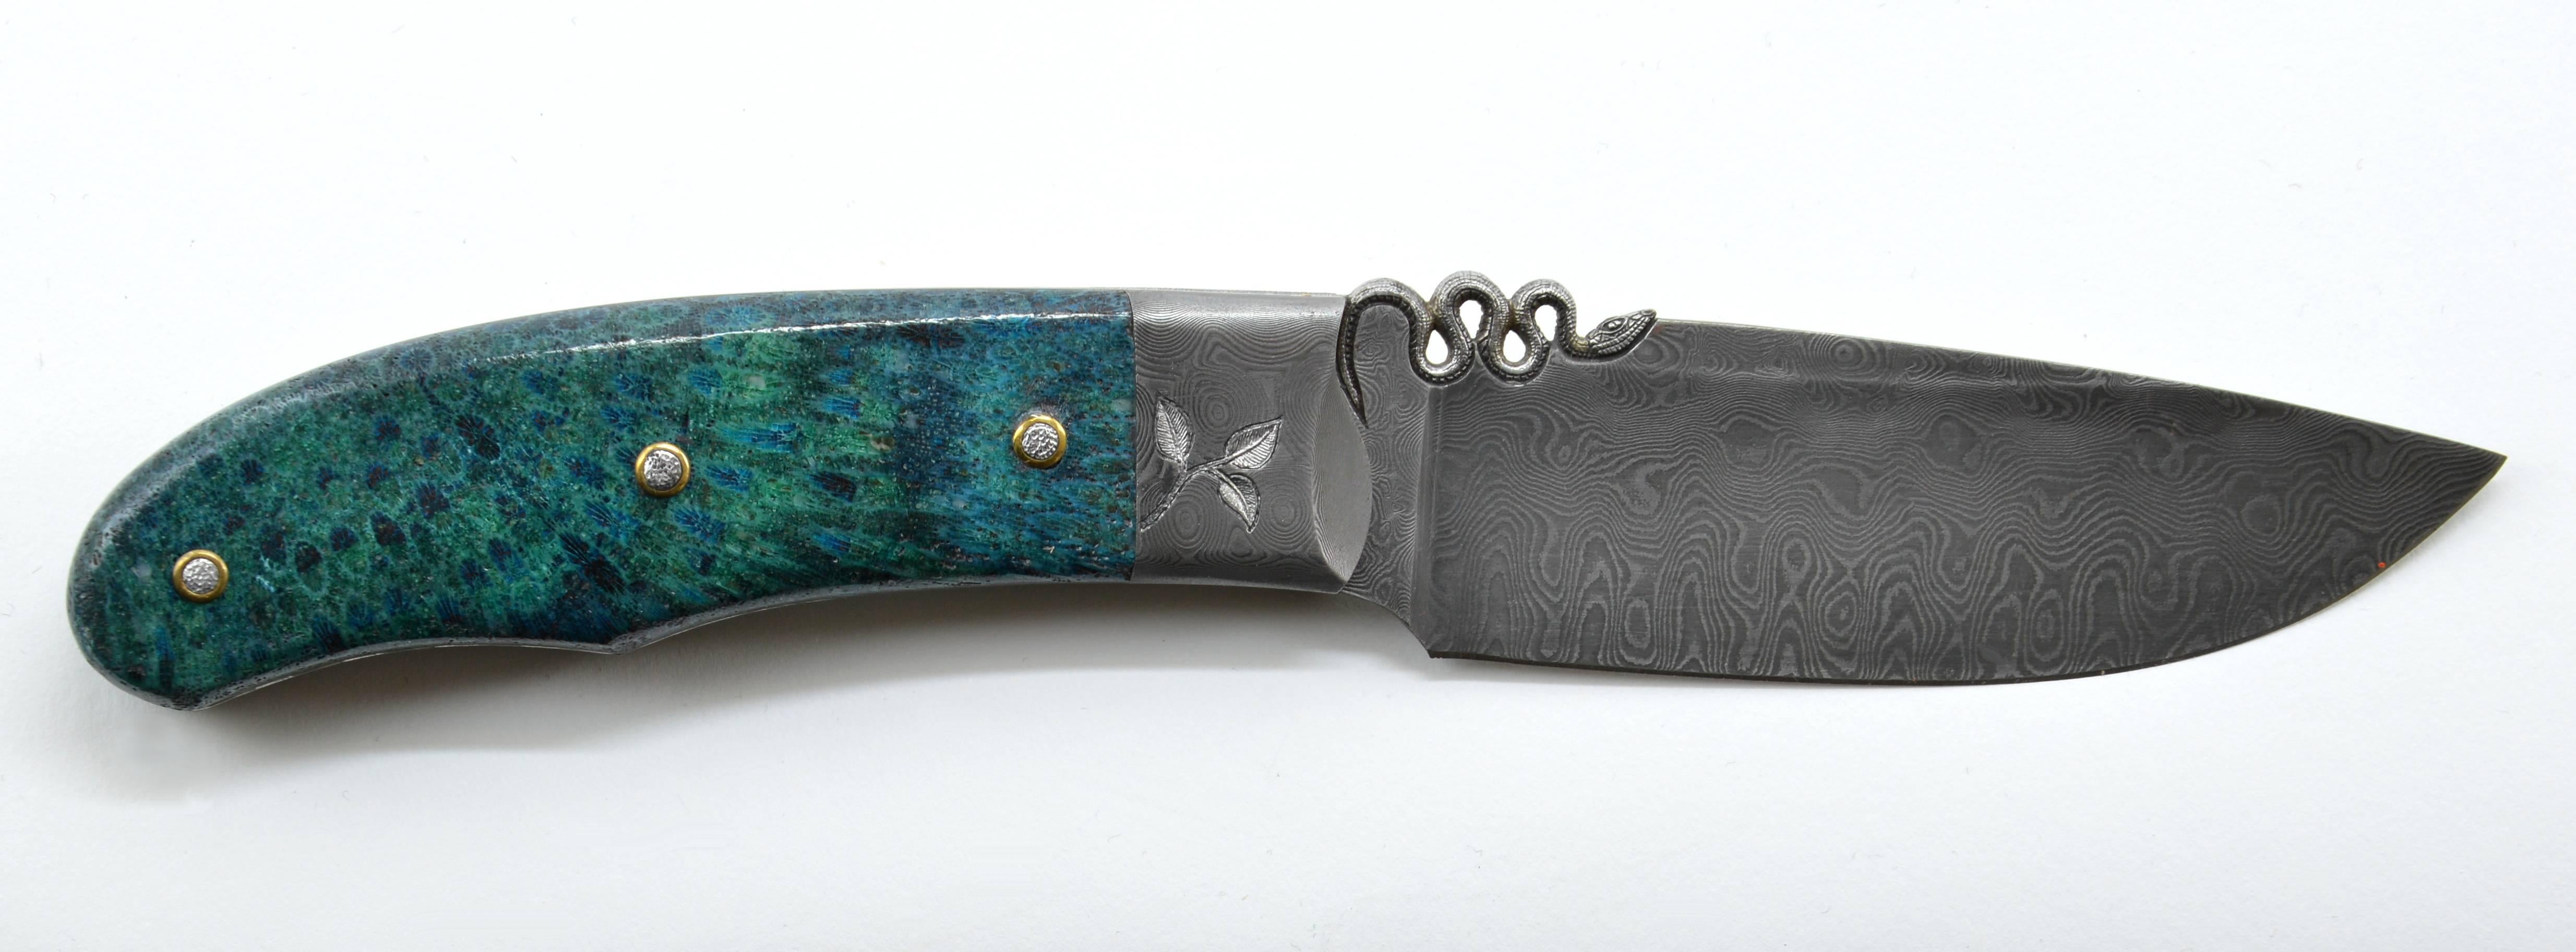 This knife is the demonstration of the common know-how of two of our best cutlers in France, anchored in our strong cutler heritage of Laguiole. A four-handed realization by Jean-Michel Cayron (BCF* 2007 and 20011) and Jerome Lamic (BCF 2015).